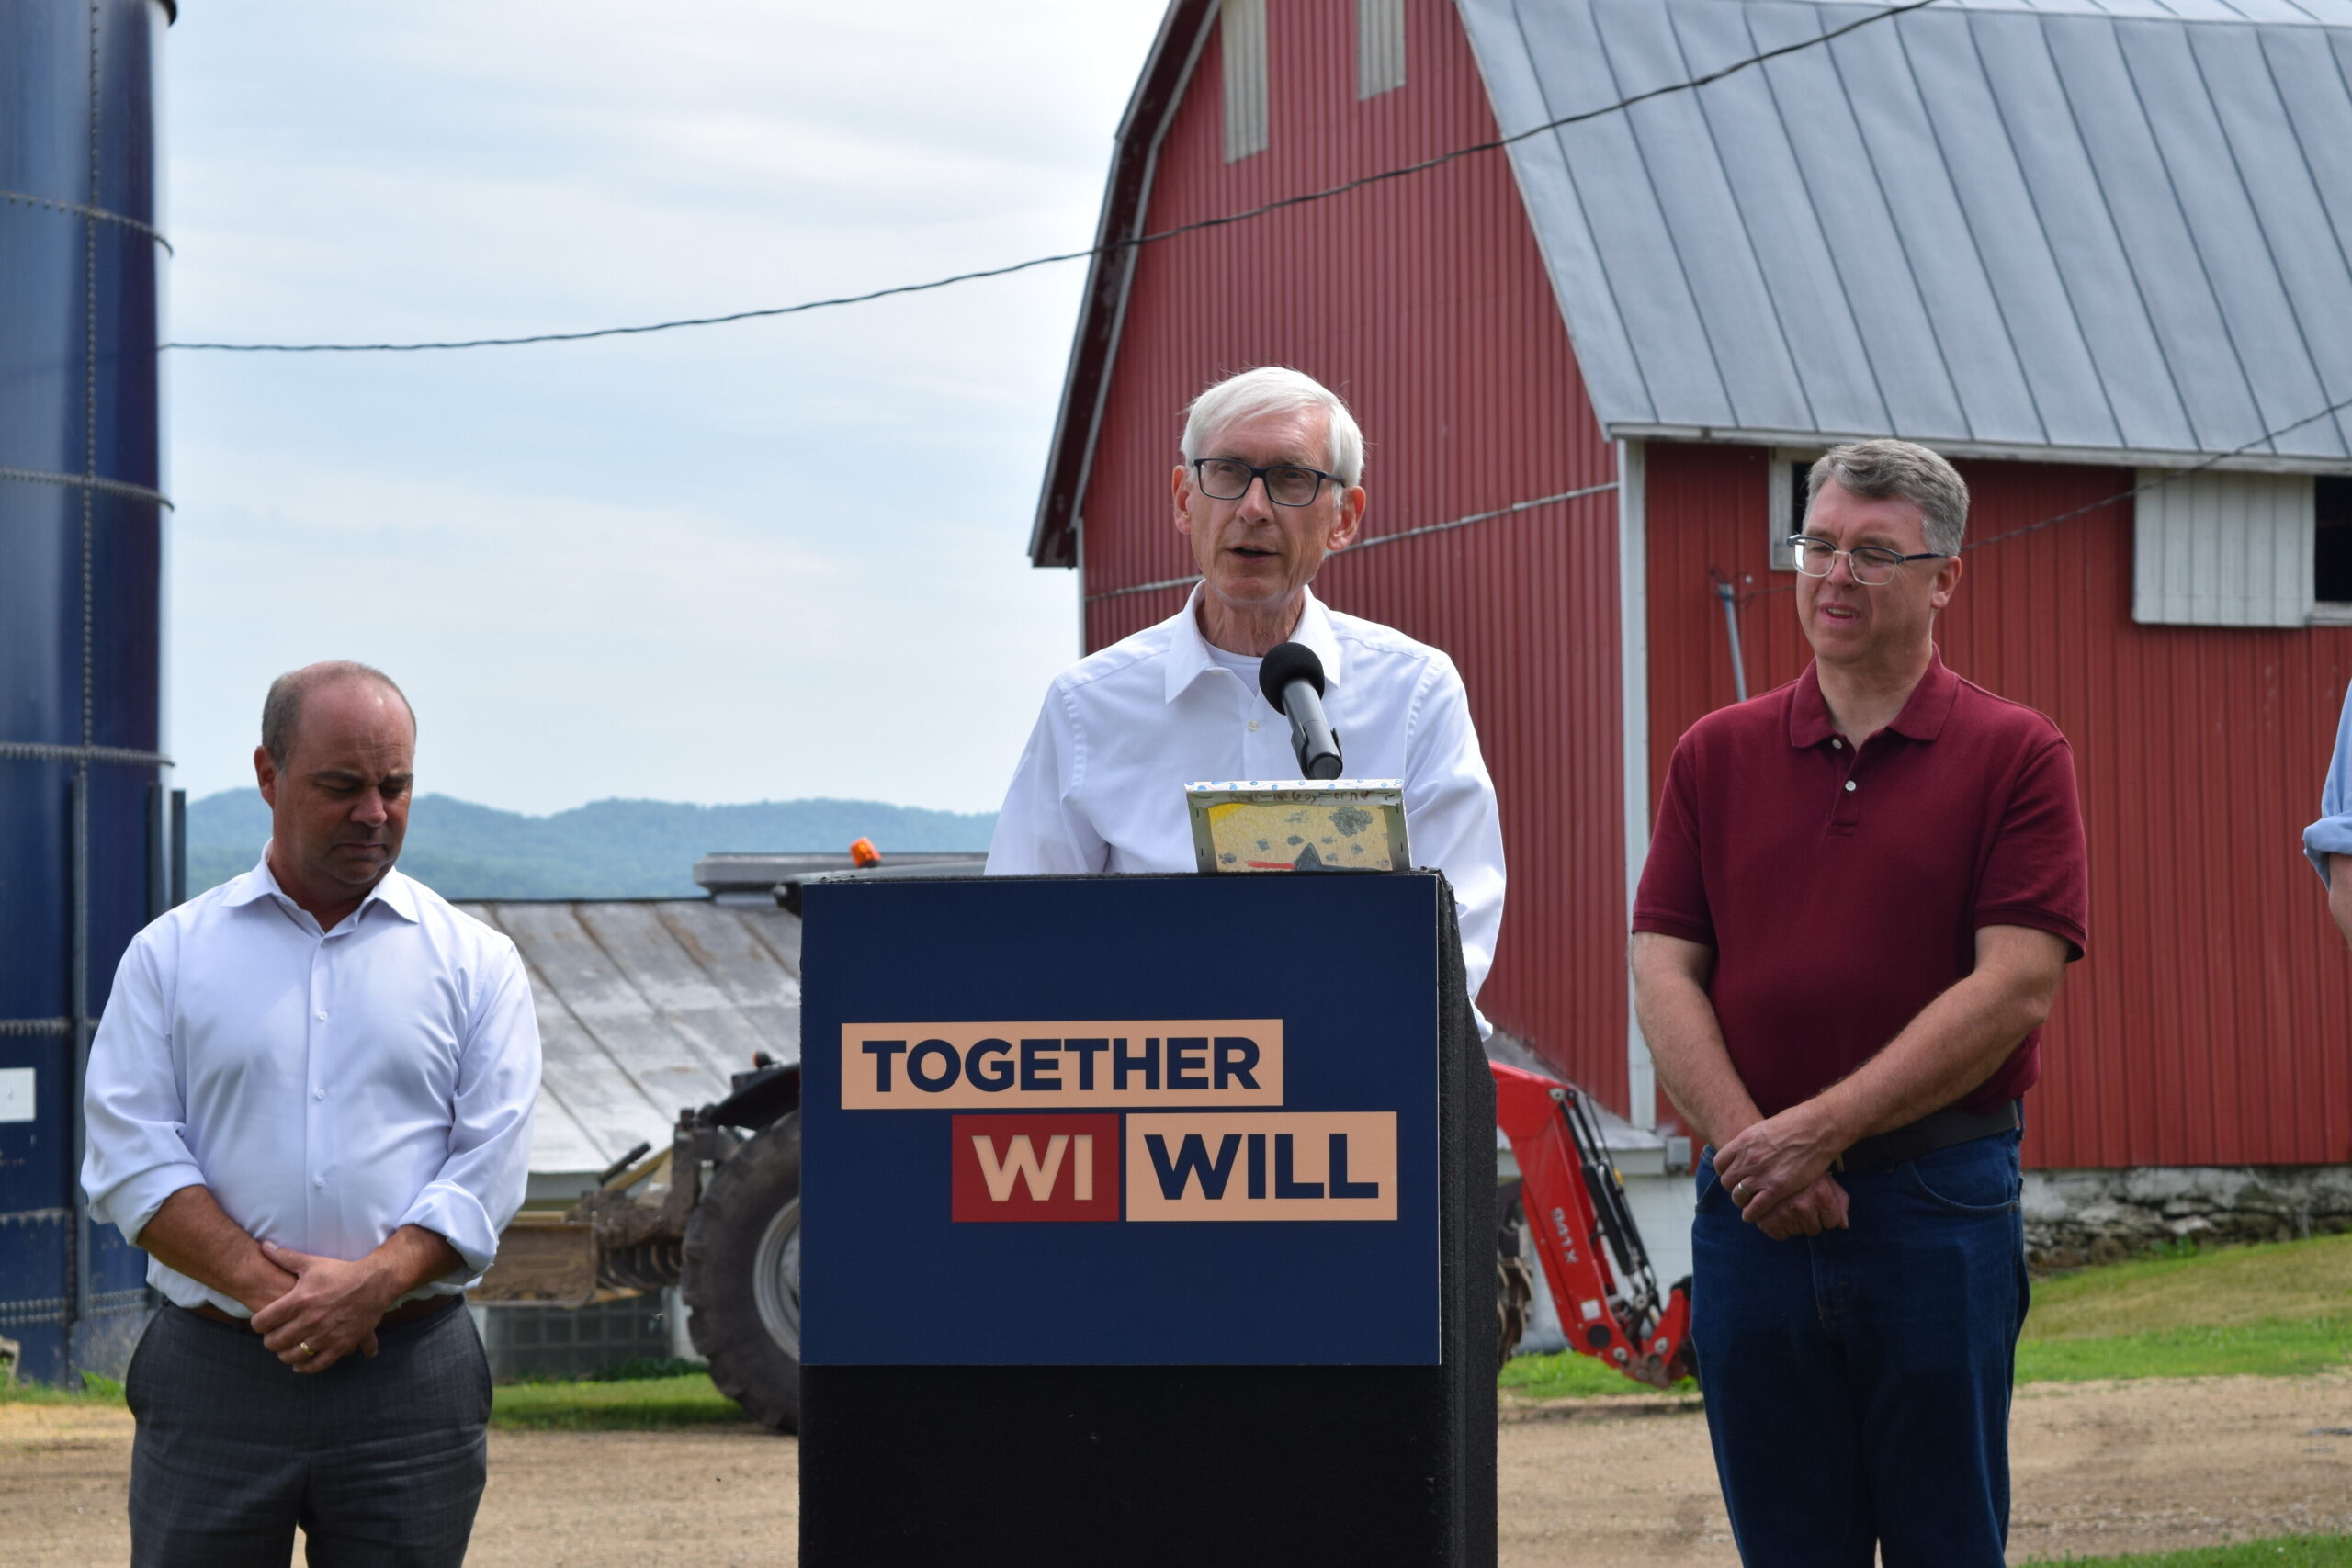 Evers talks about the state budget in front of a red barn